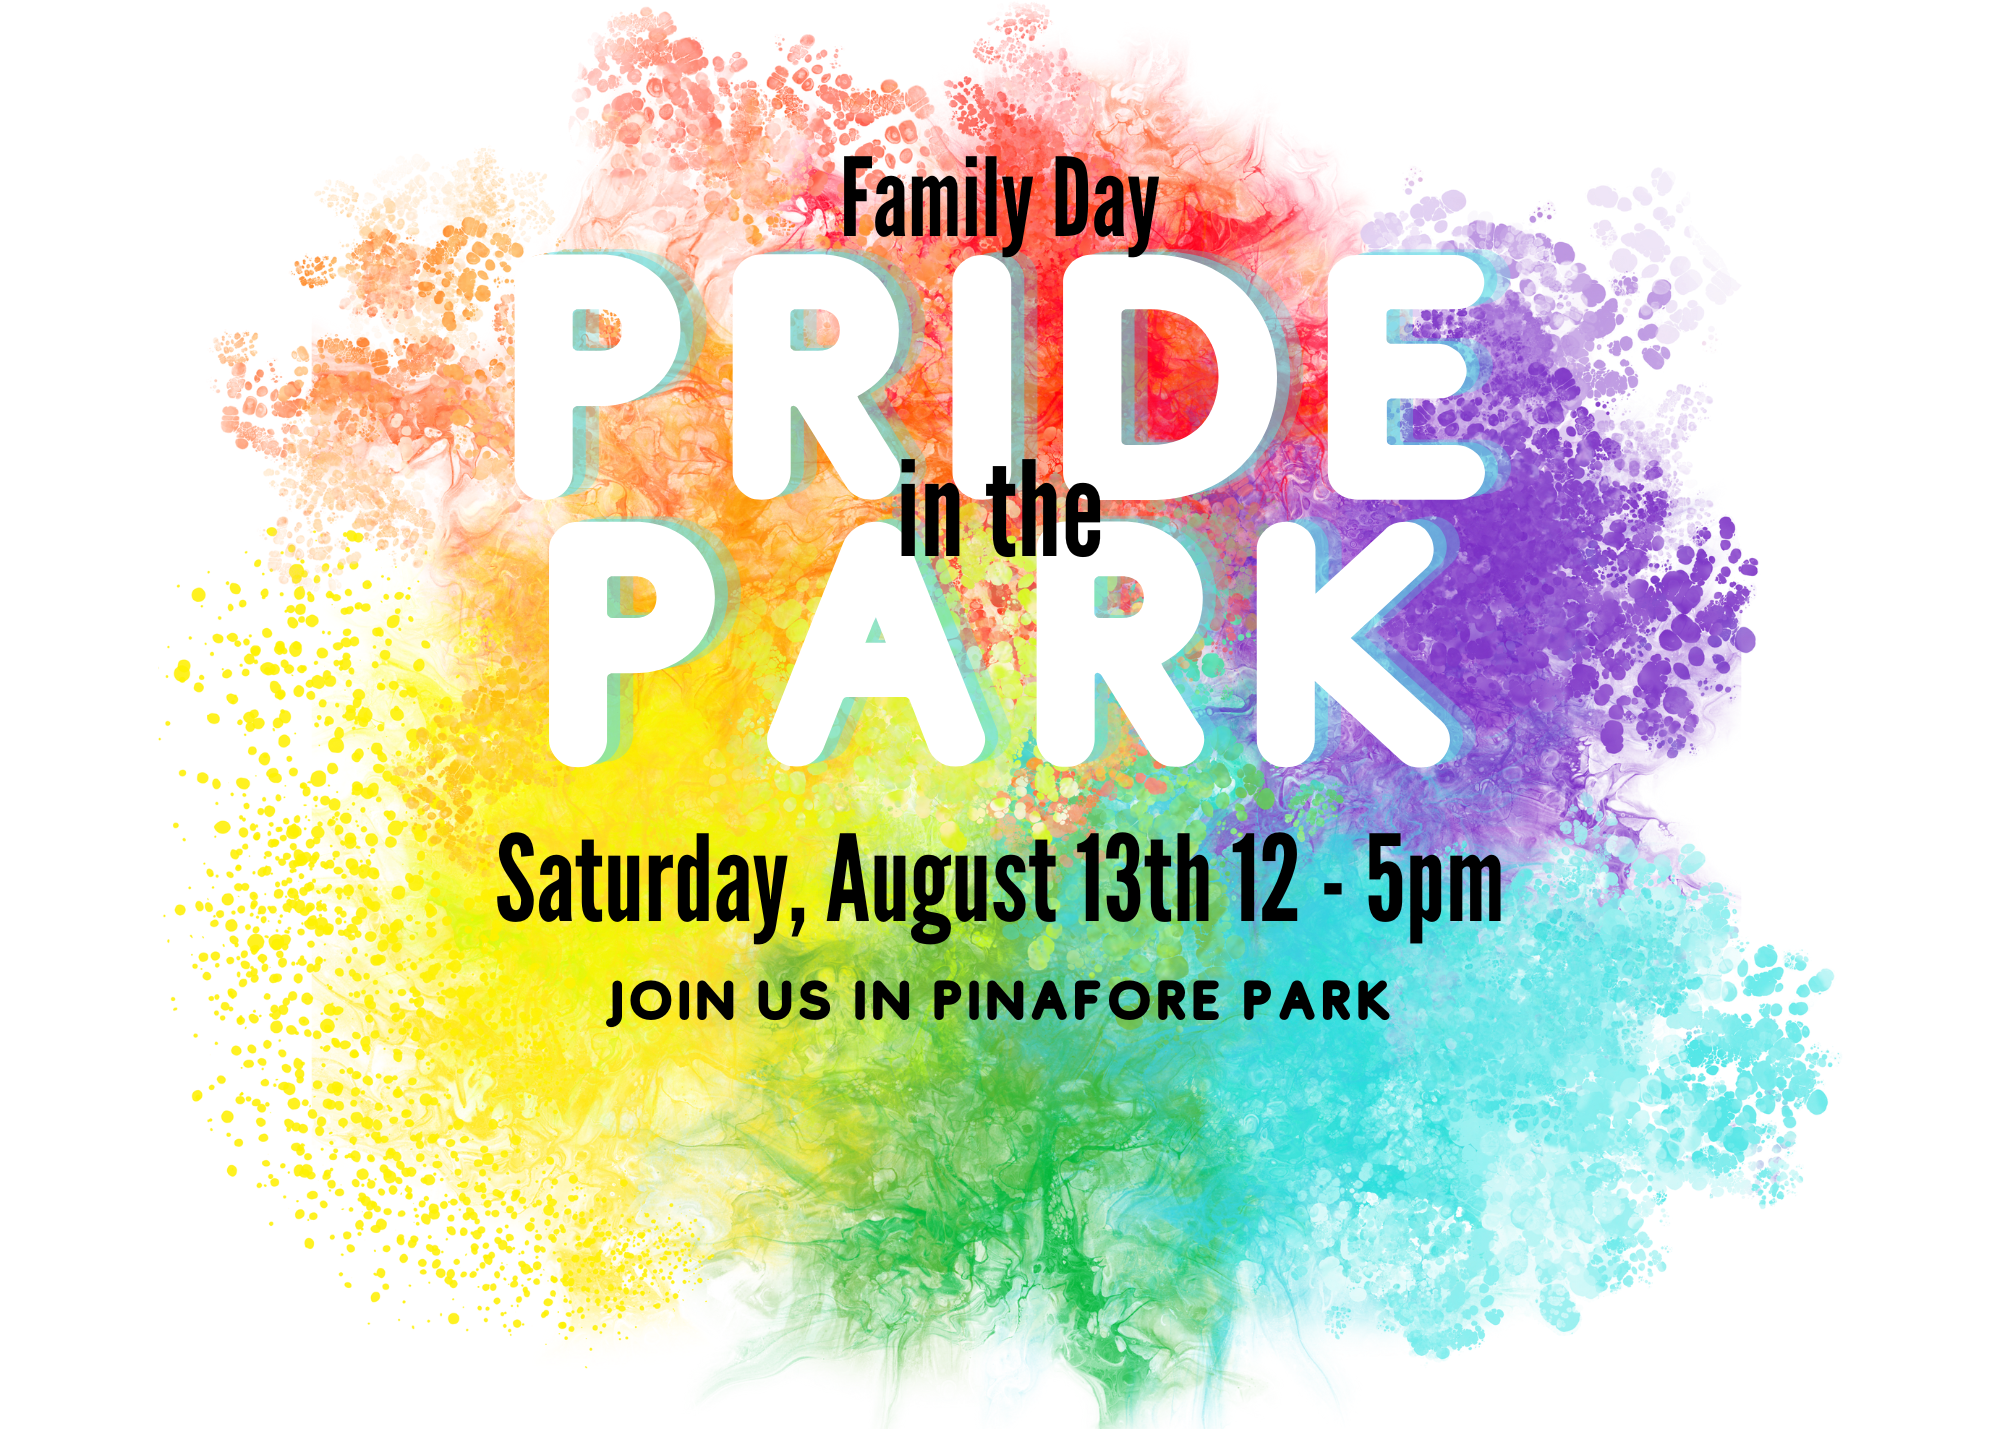 Family Day Pride in the Park Saturday, August 13th 12 - 5pm